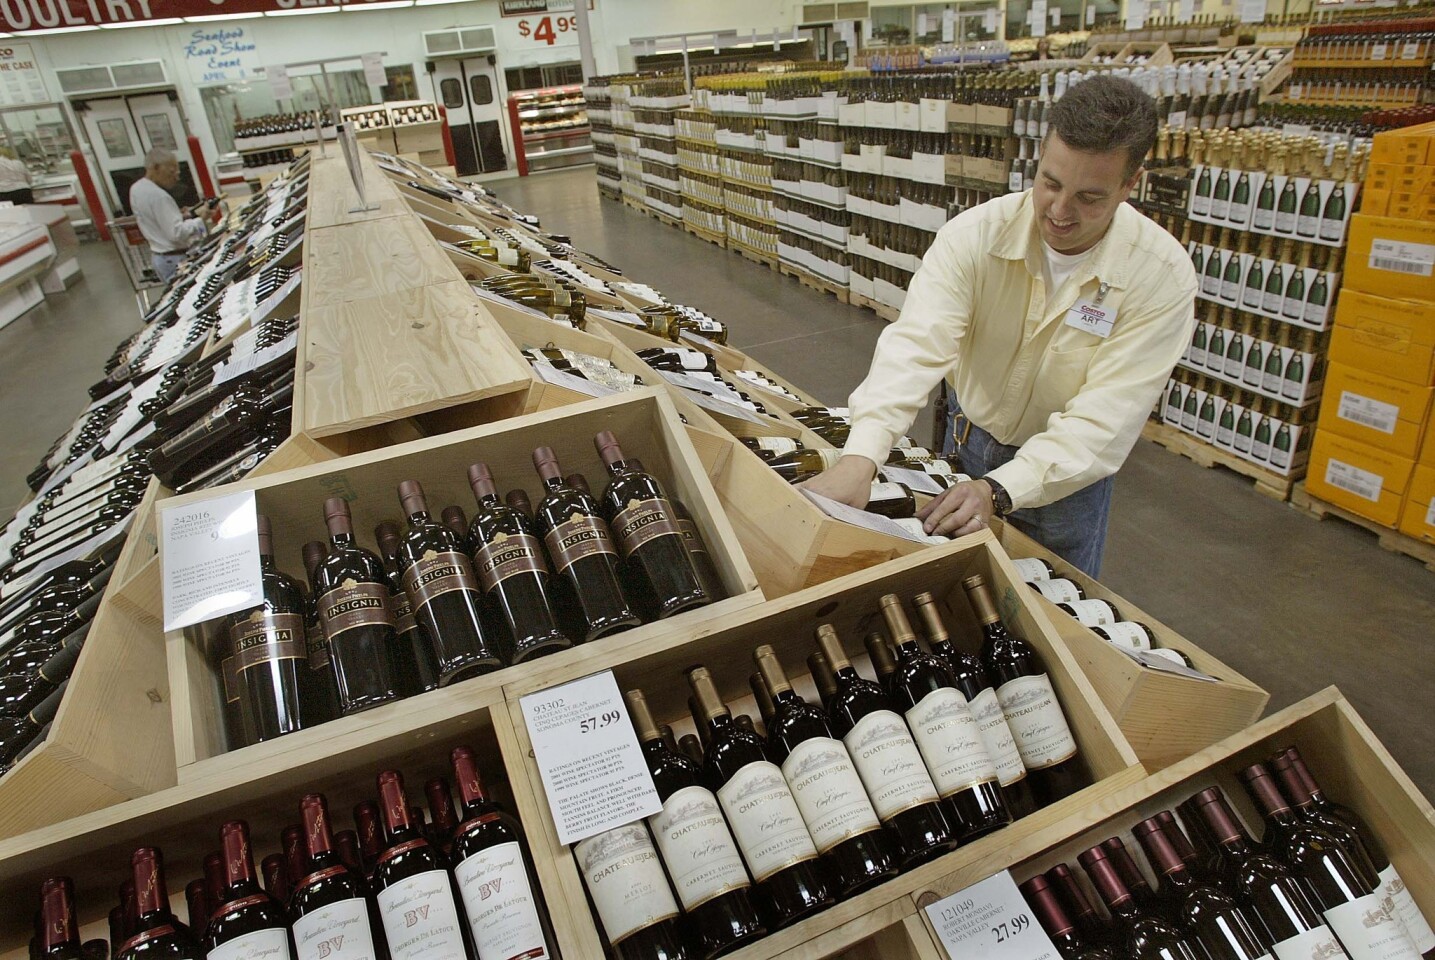 We'll drink to the great wine buys at Costco.